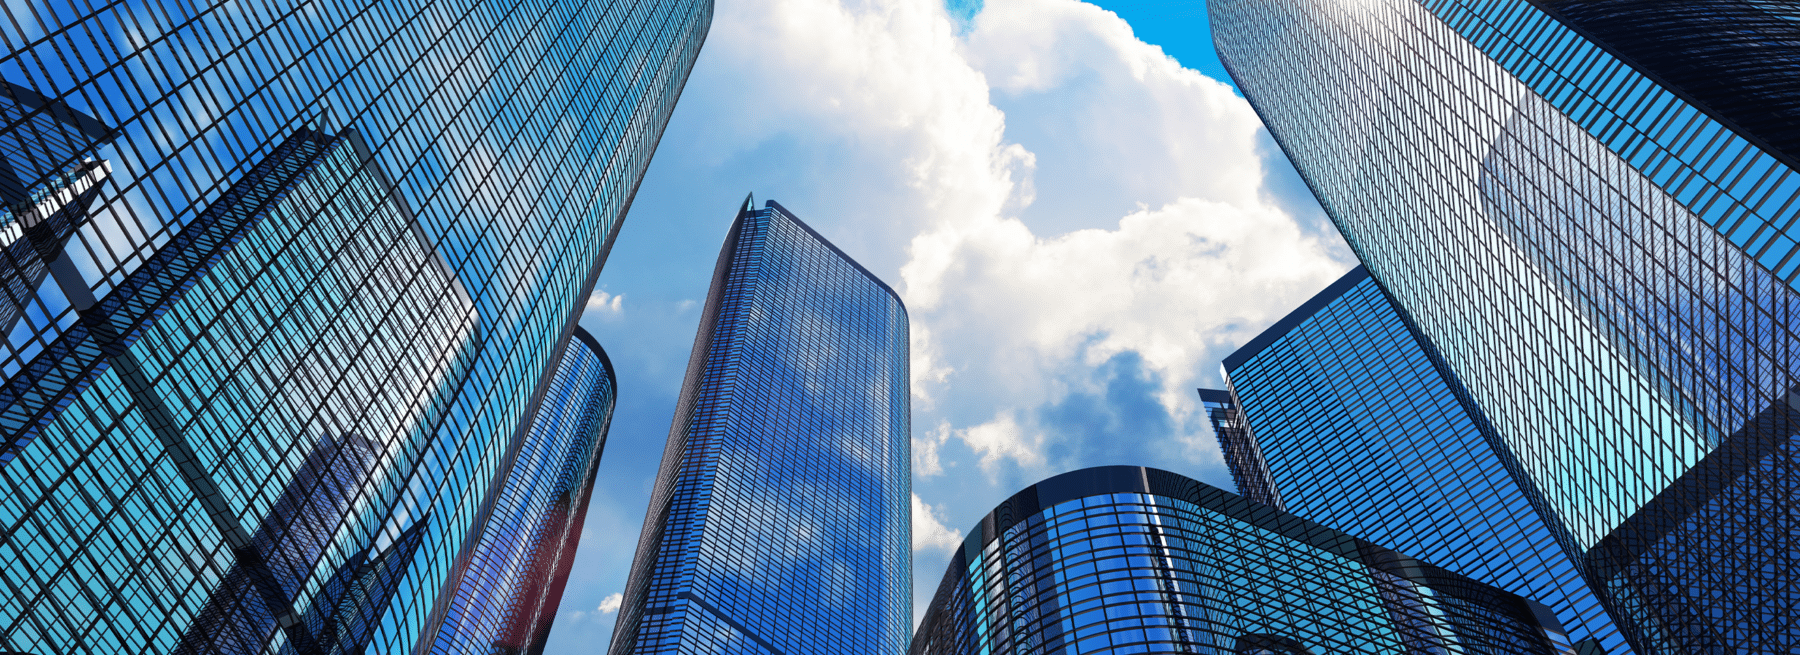 What does commercial real estate need to address?